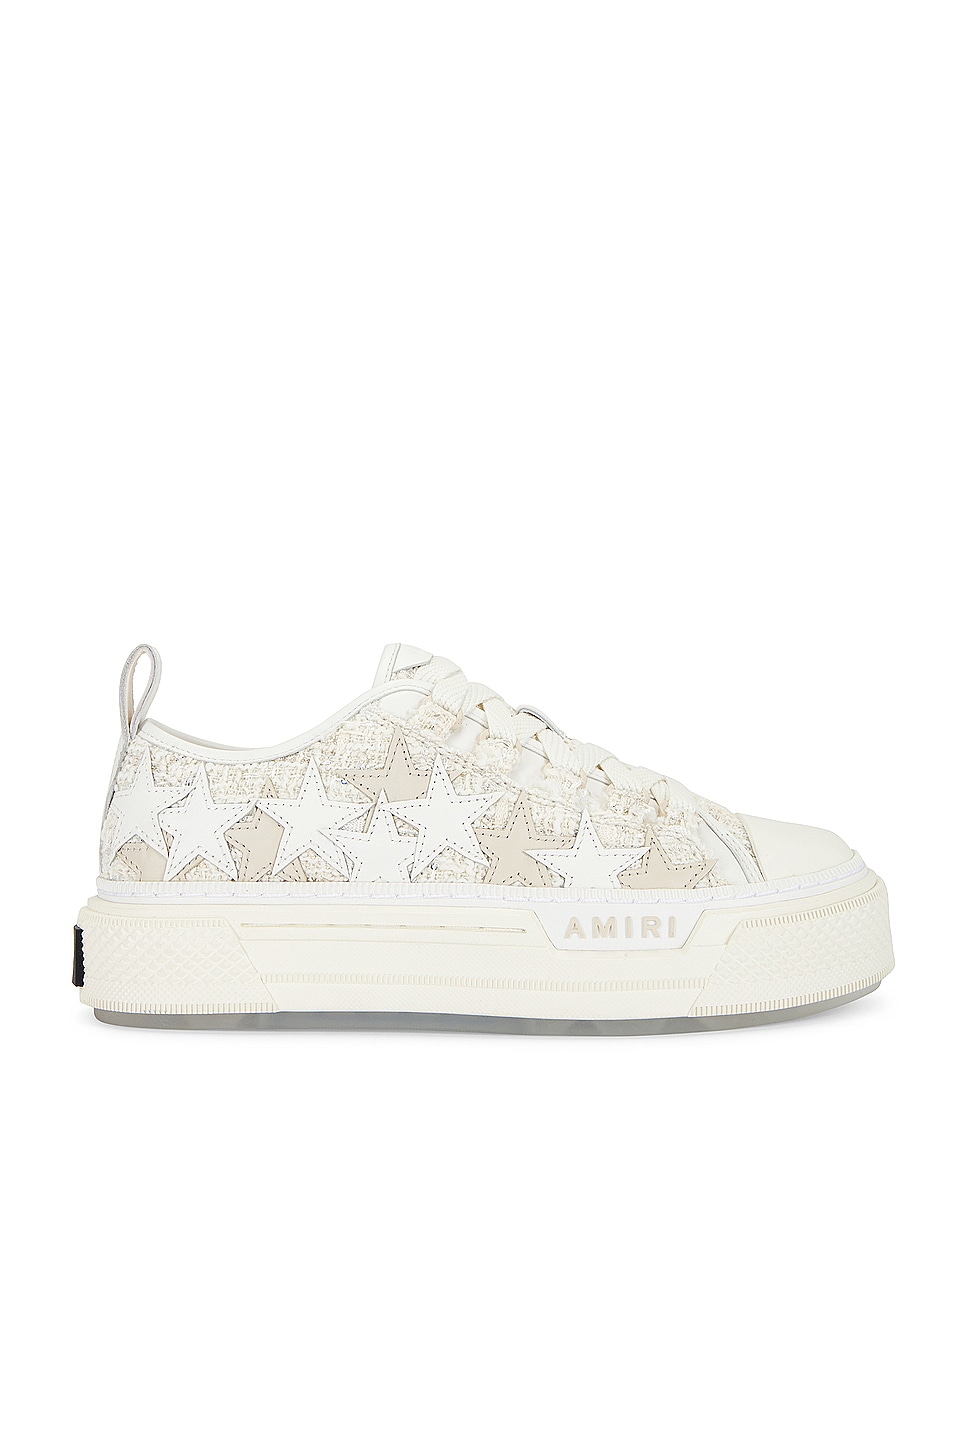 Image 1 of Amiri Boucle Stars Court Low Sneaker in Alabaster